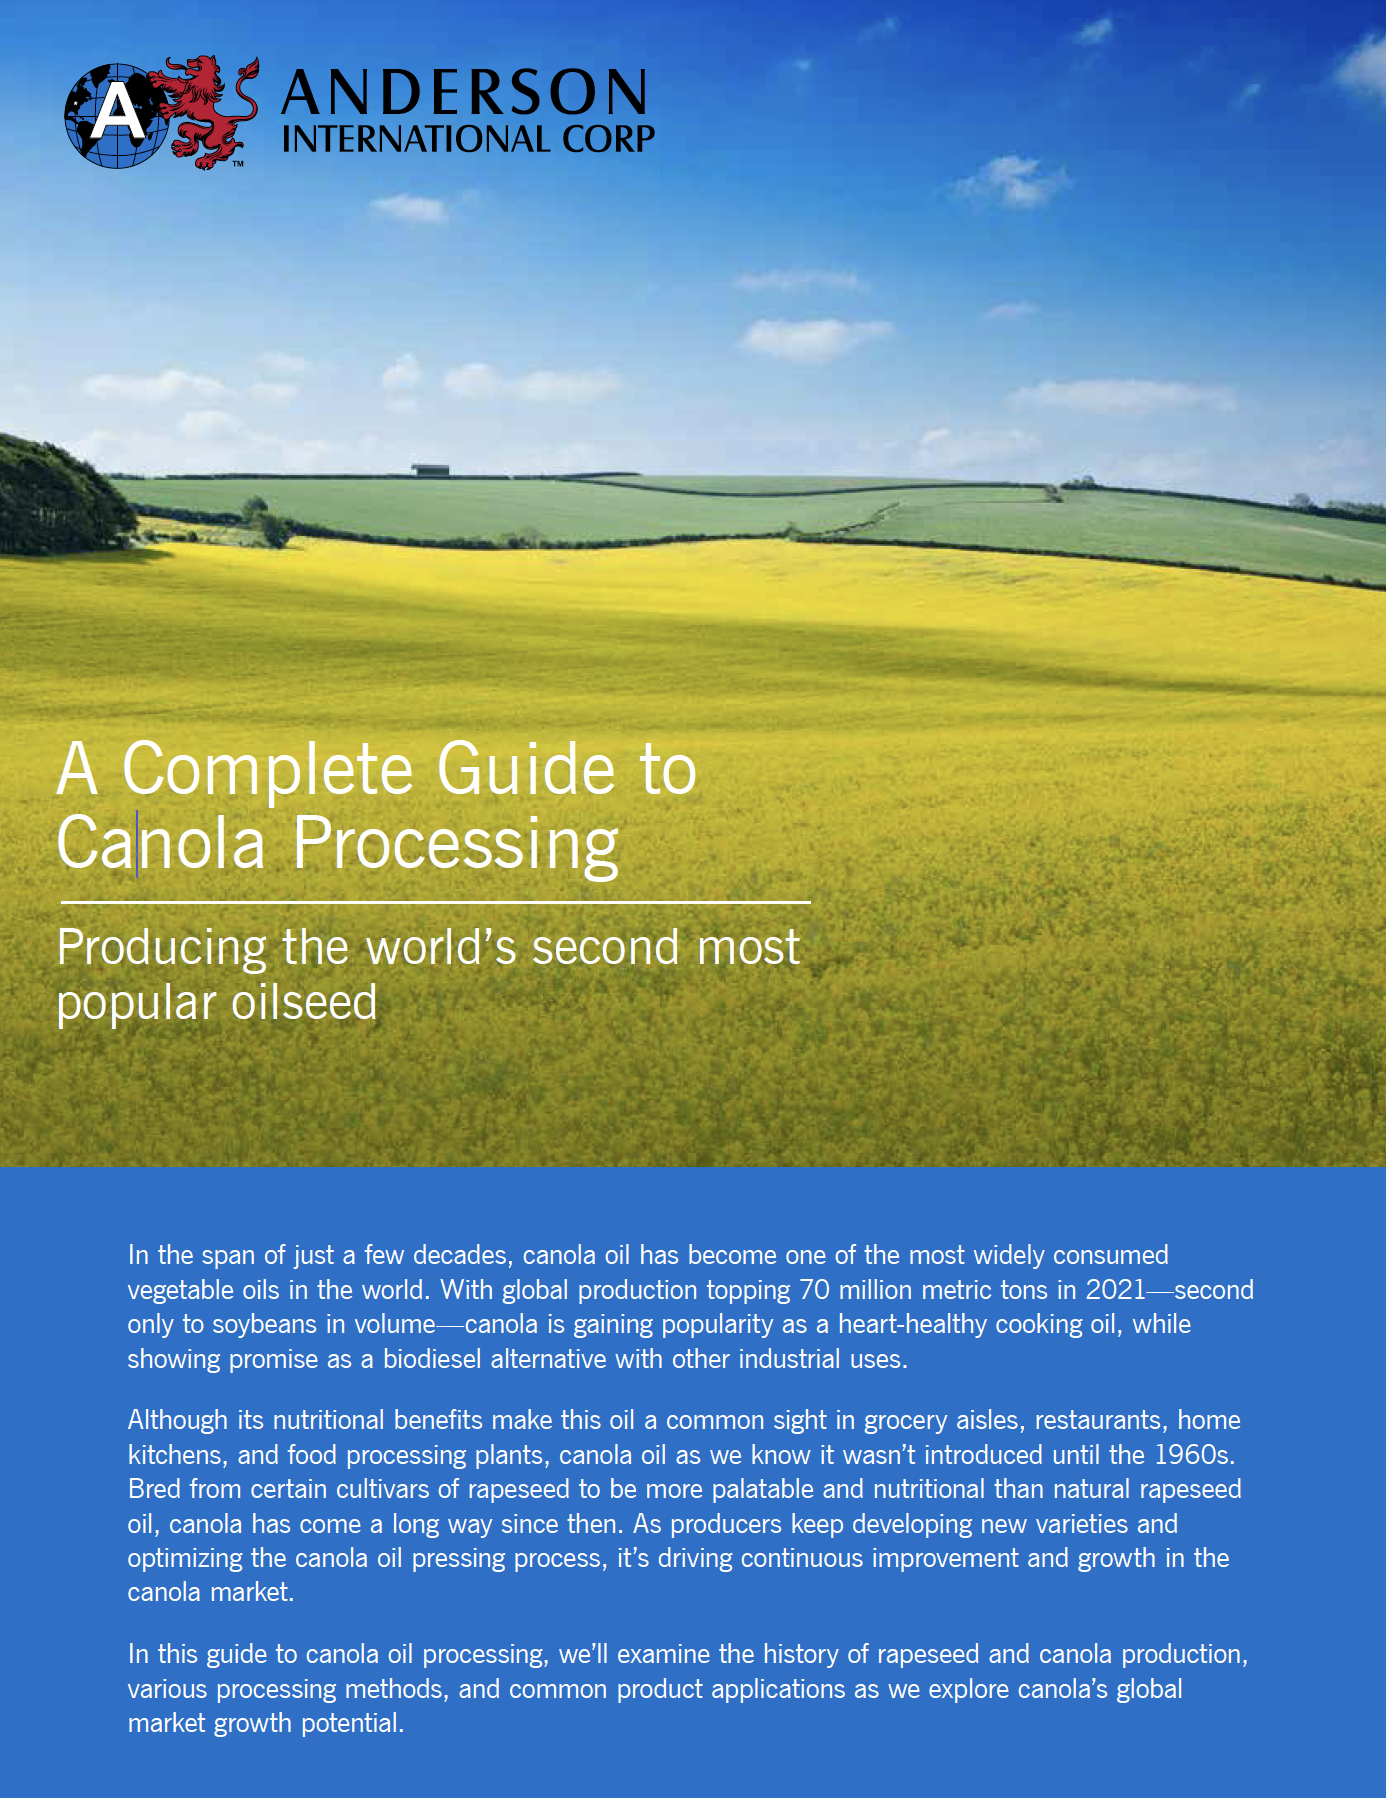 Complete Guide To Canola Processing Anderson International Corp 0418